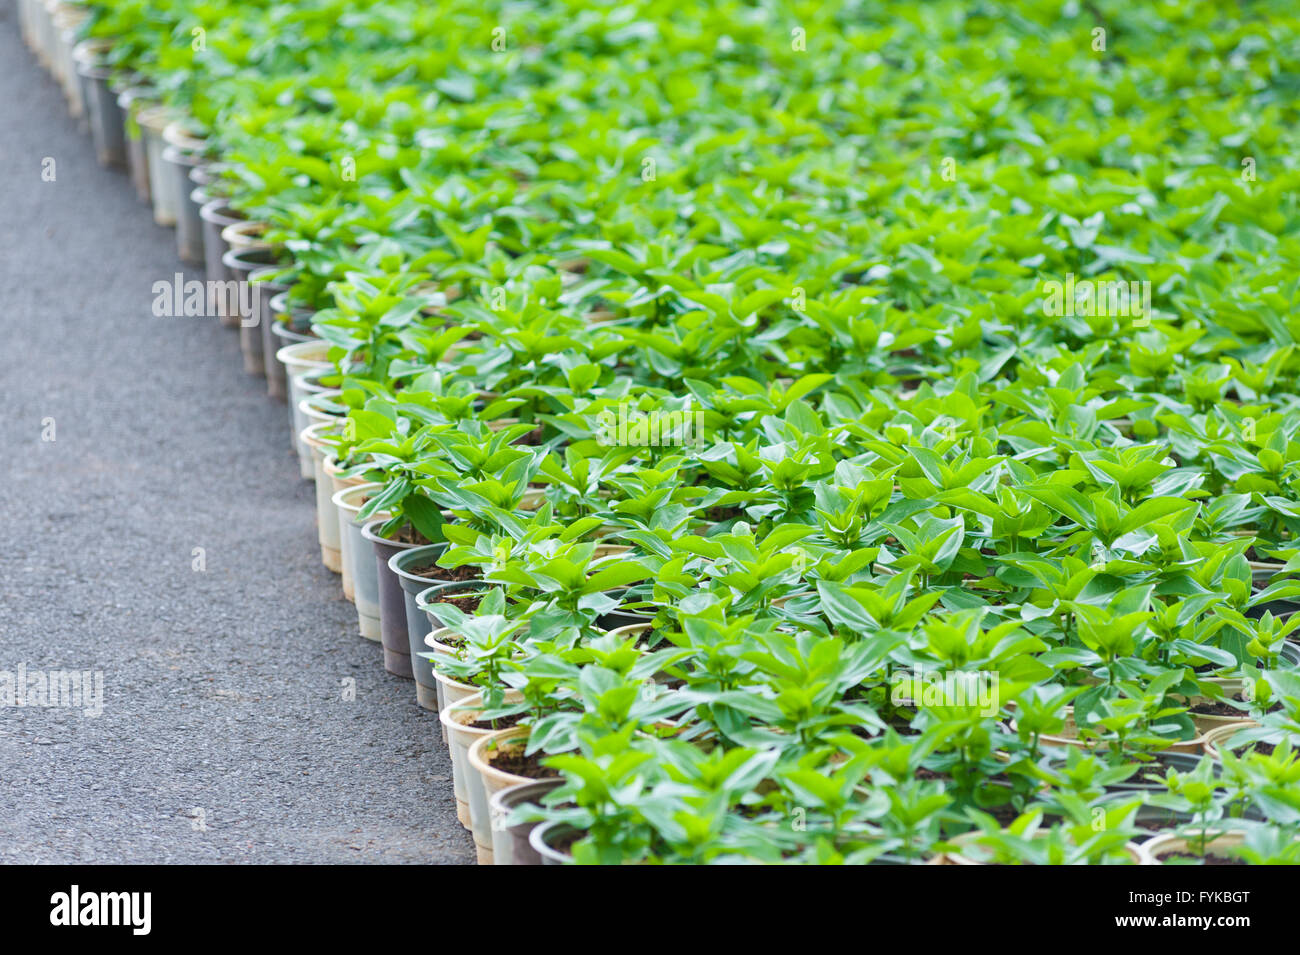 lots of young flower plants in pots Stock Photo